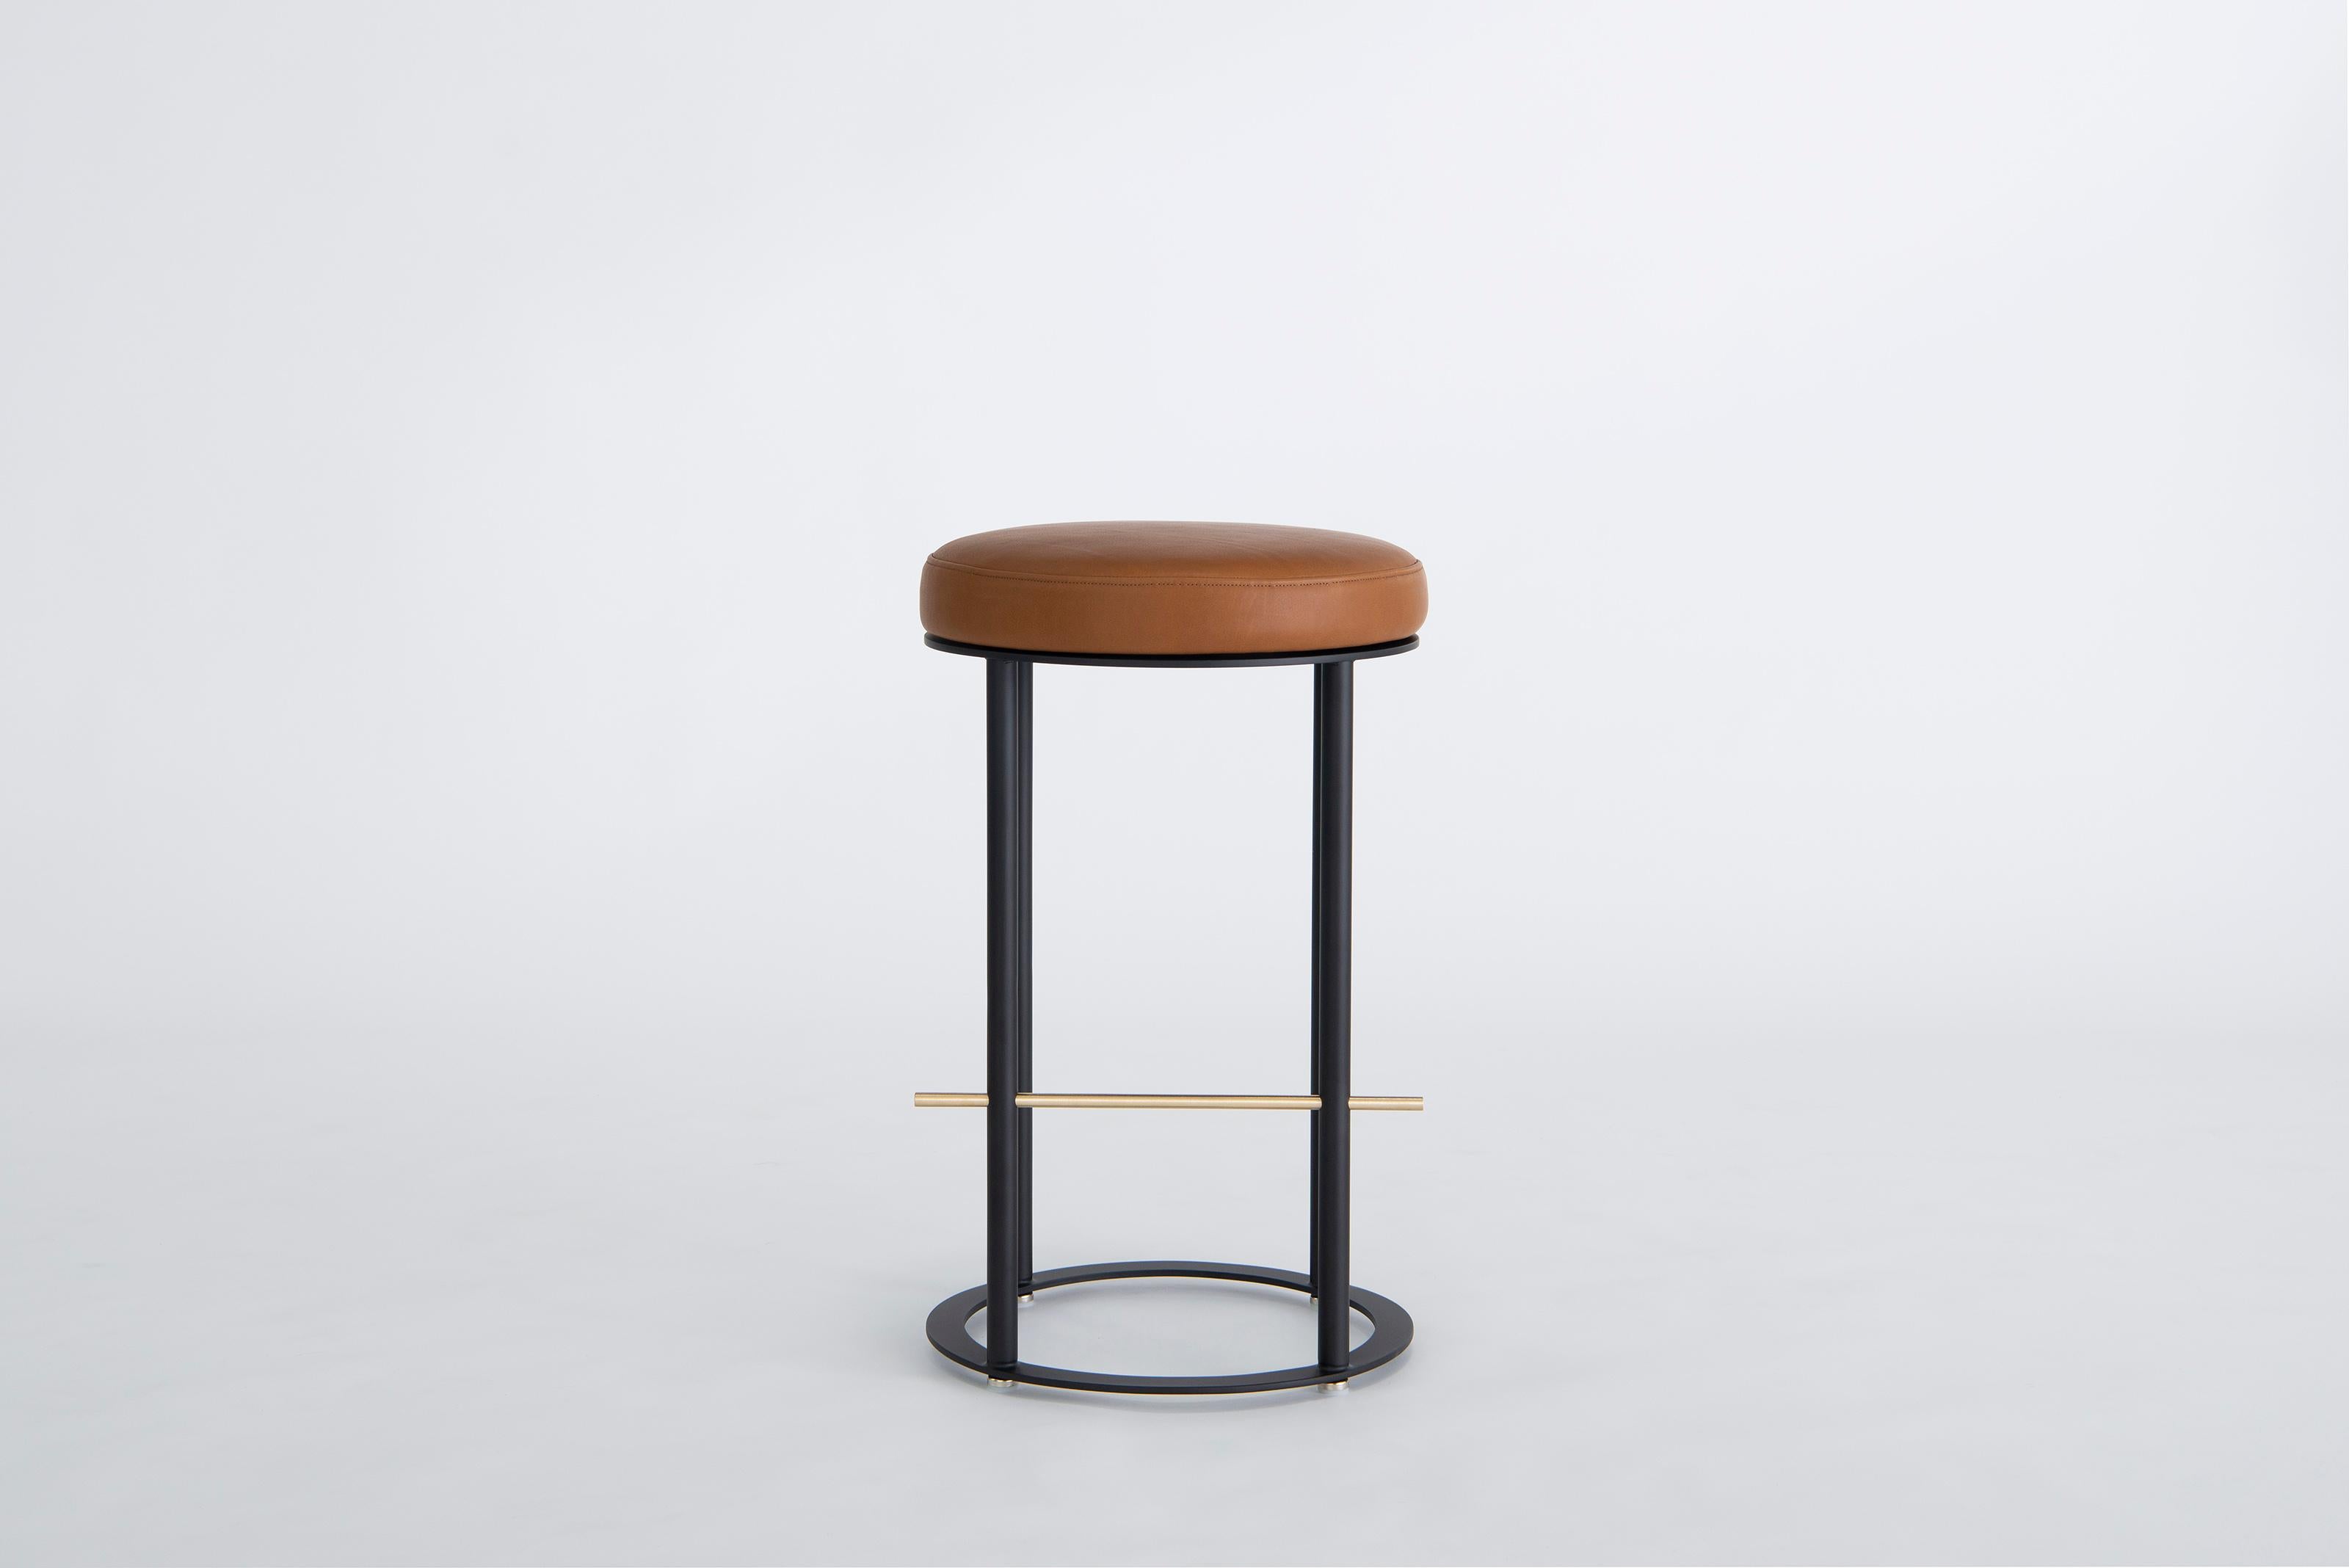 Icon Counter Stool by Phase Design
Dimensions: Ø 40.6  H 63.5 cm. SH: 63.5 cm.
Materials: Leather, powder-coated metal and brushed brass.

Solid steel and brass with upholstered top. Steel bar available in a flat black or white powder coat finish